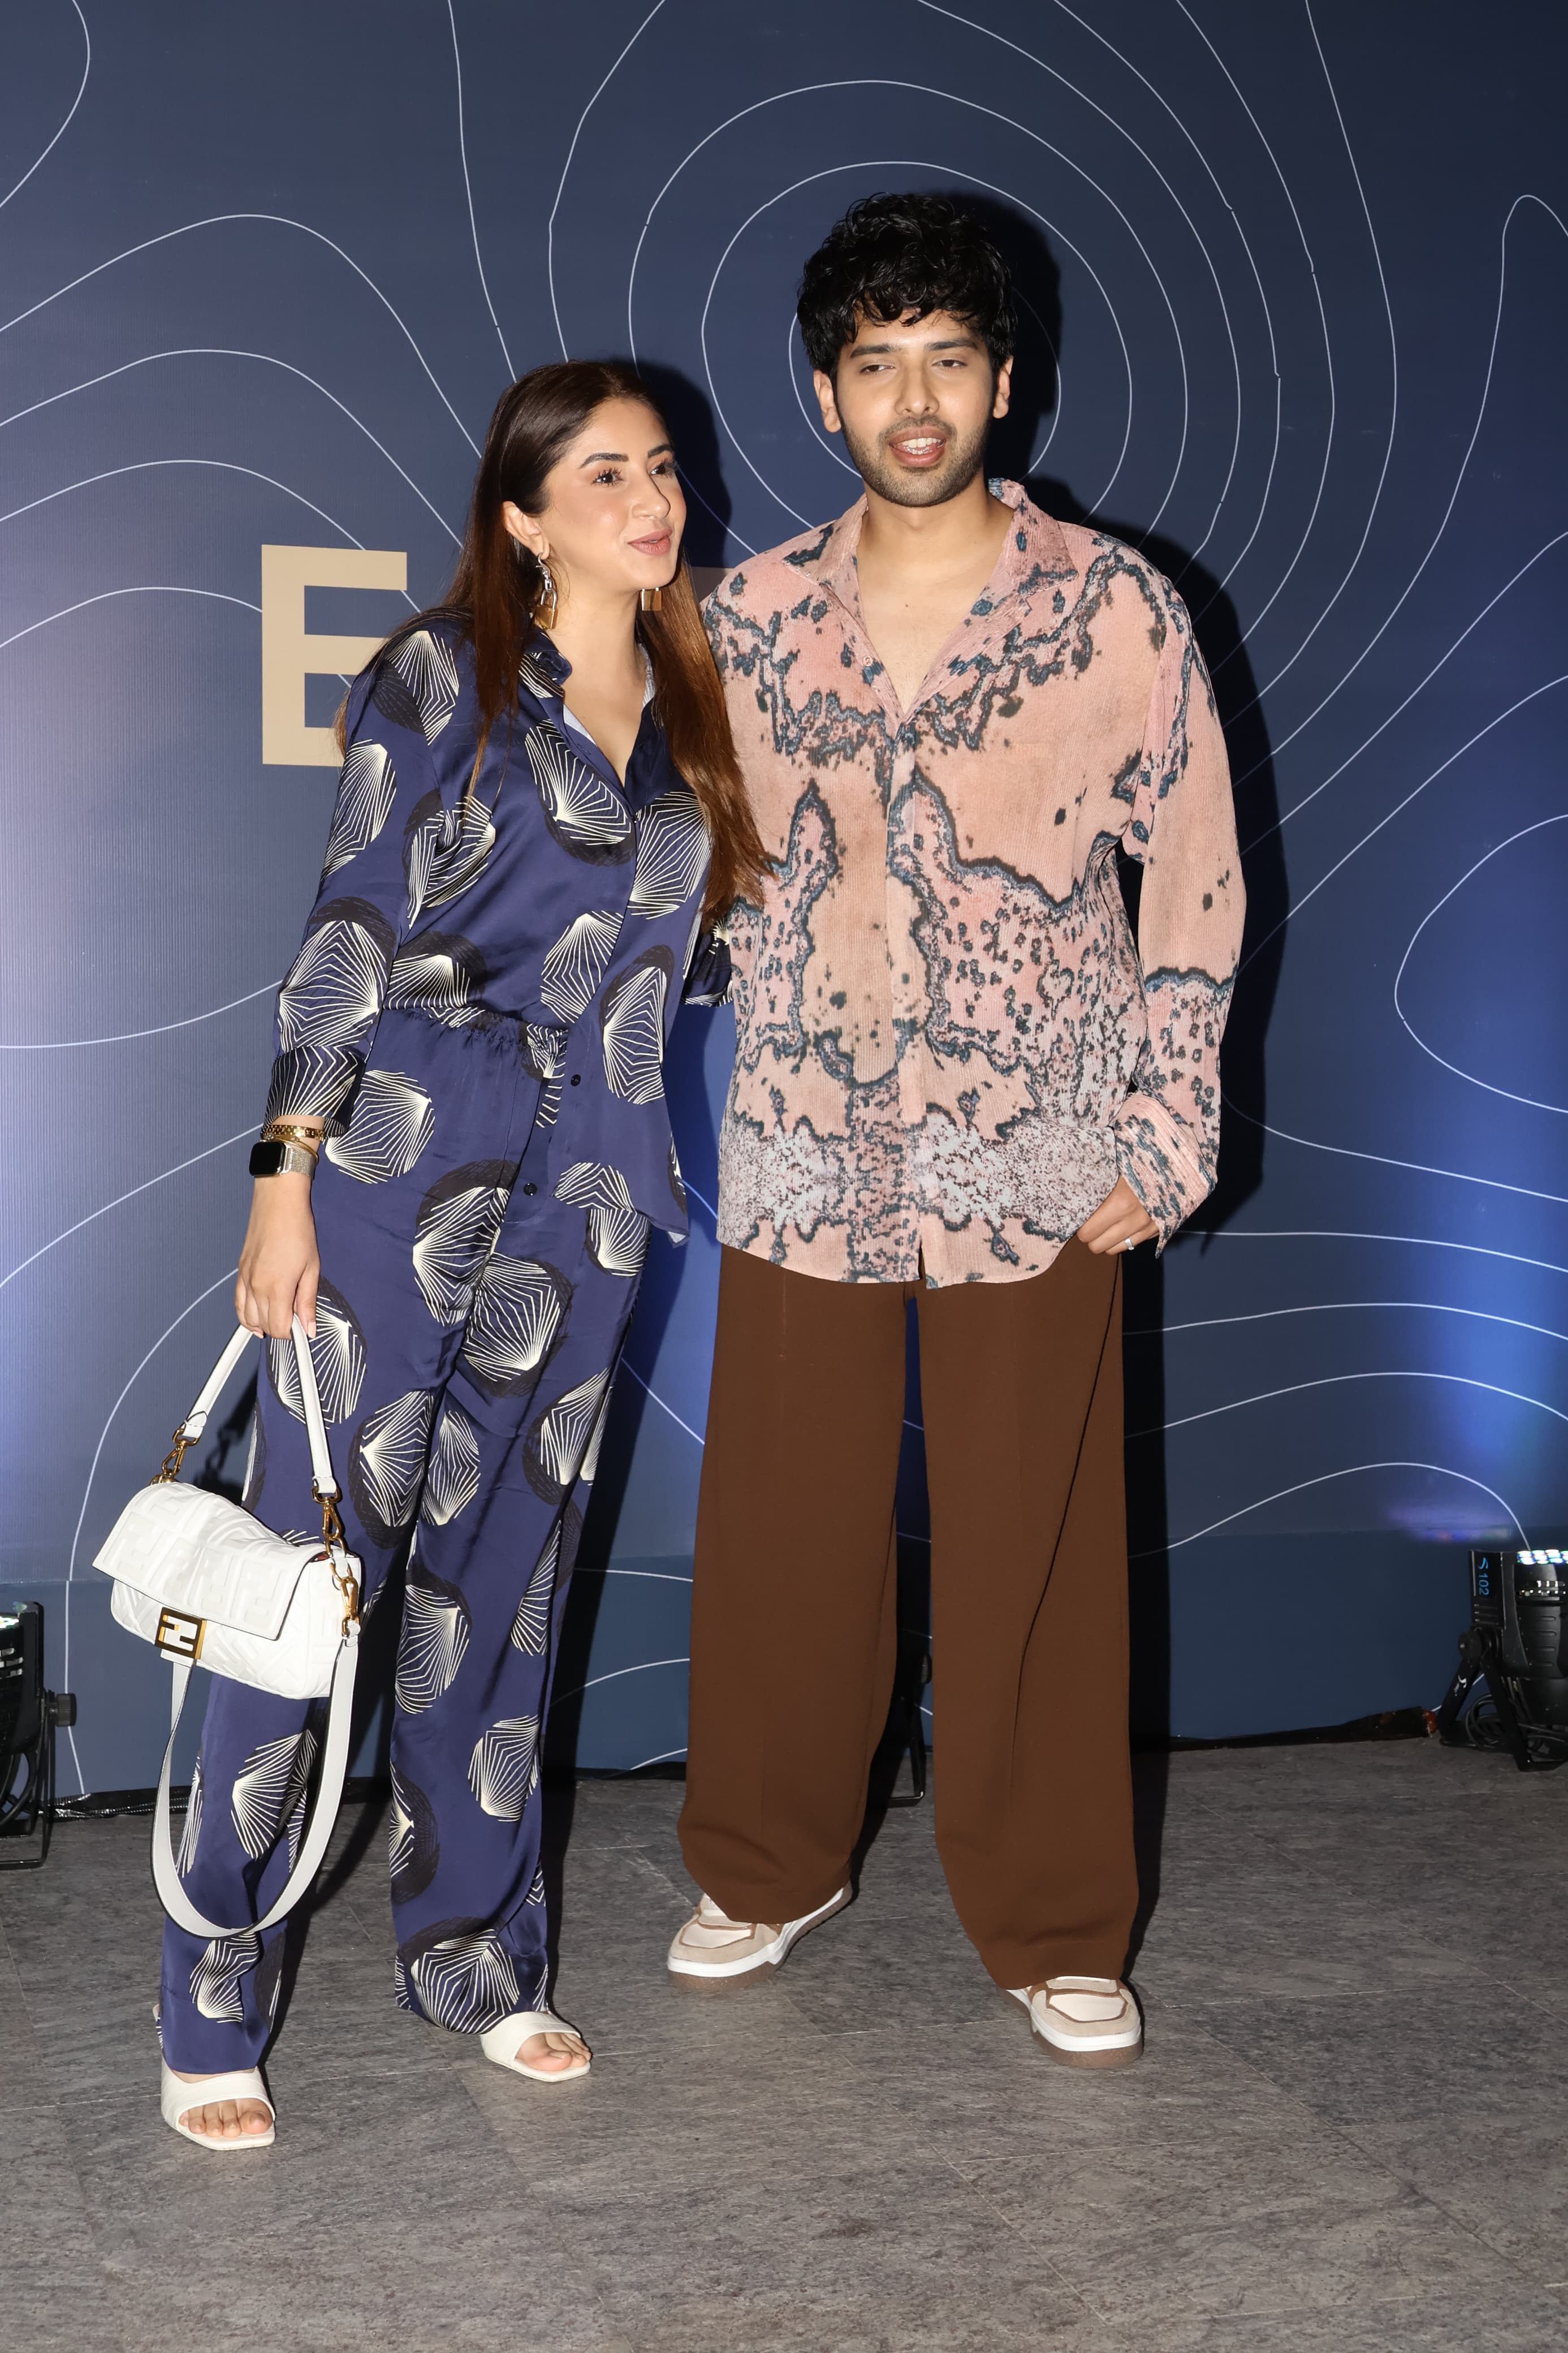 Lots of other celebrities showed up to the party too, like singer Armaan Malik and his fiancée Aashna Shroff